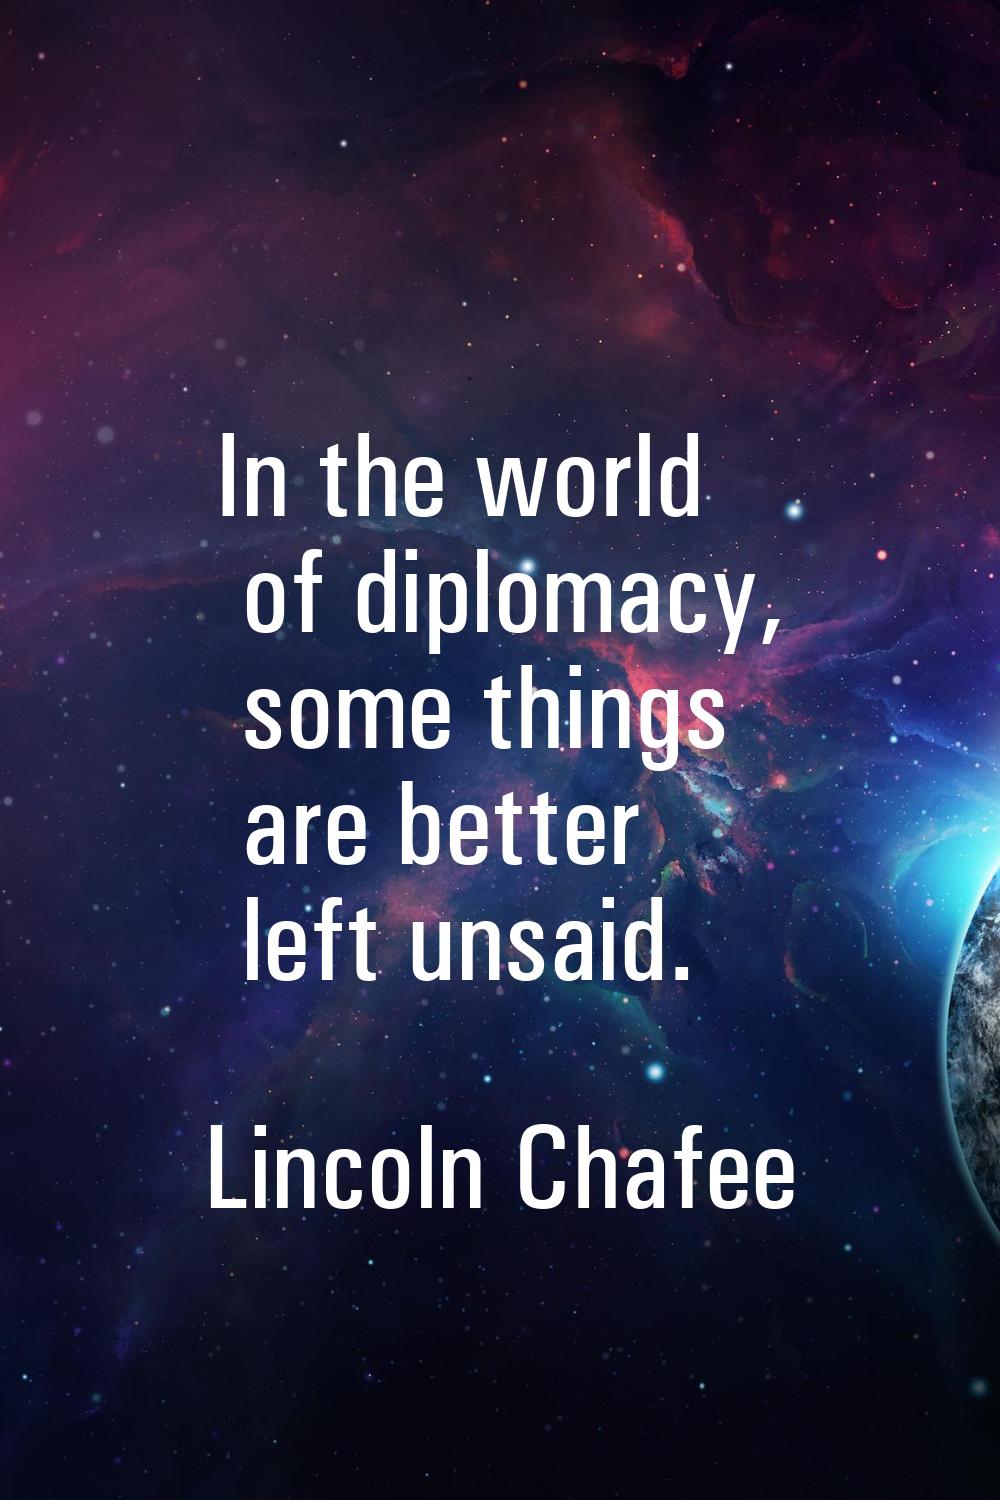 In the world of diplomacy, some things are better left unsaid.